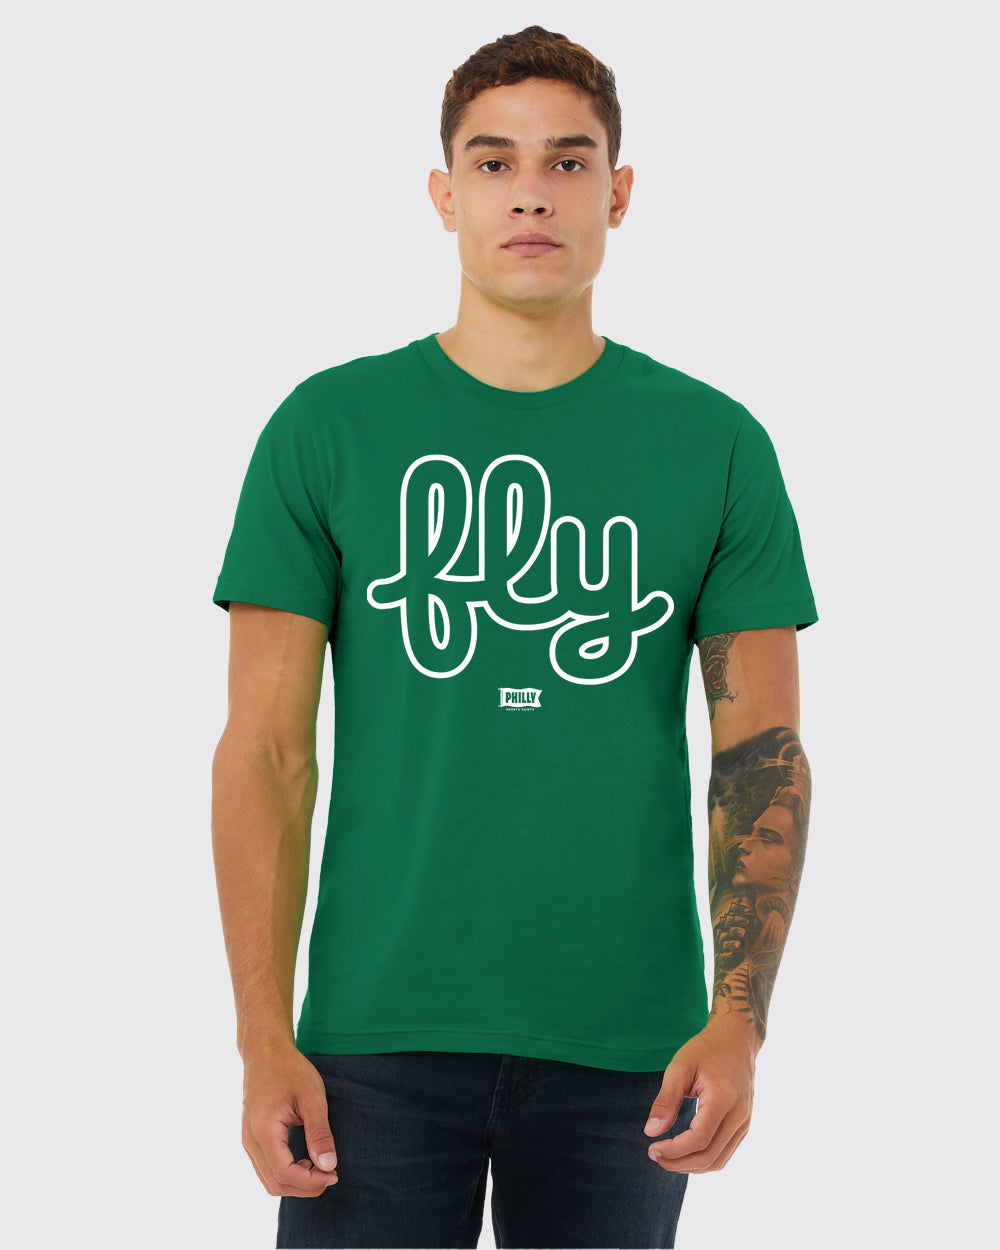 Ultra Fly Script Shirt - Eagles, Limited Edition, T-Shirts - Philly Sports Shirts